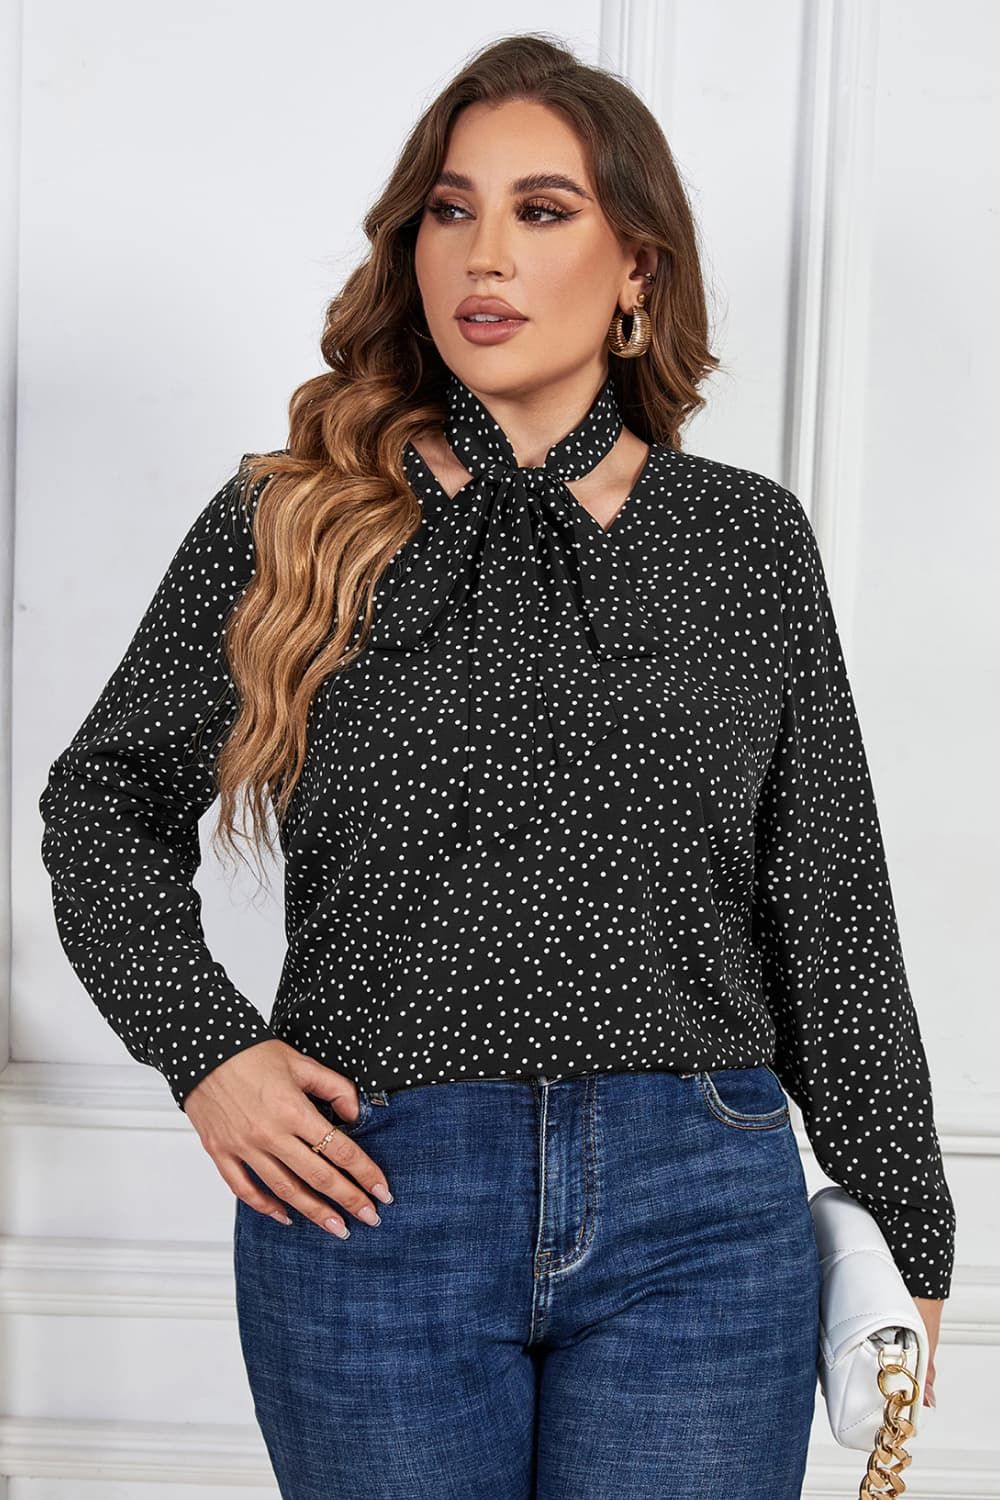 Melo Apparel Plus Size Printed Tie Neck Long Sleeve Blouse.